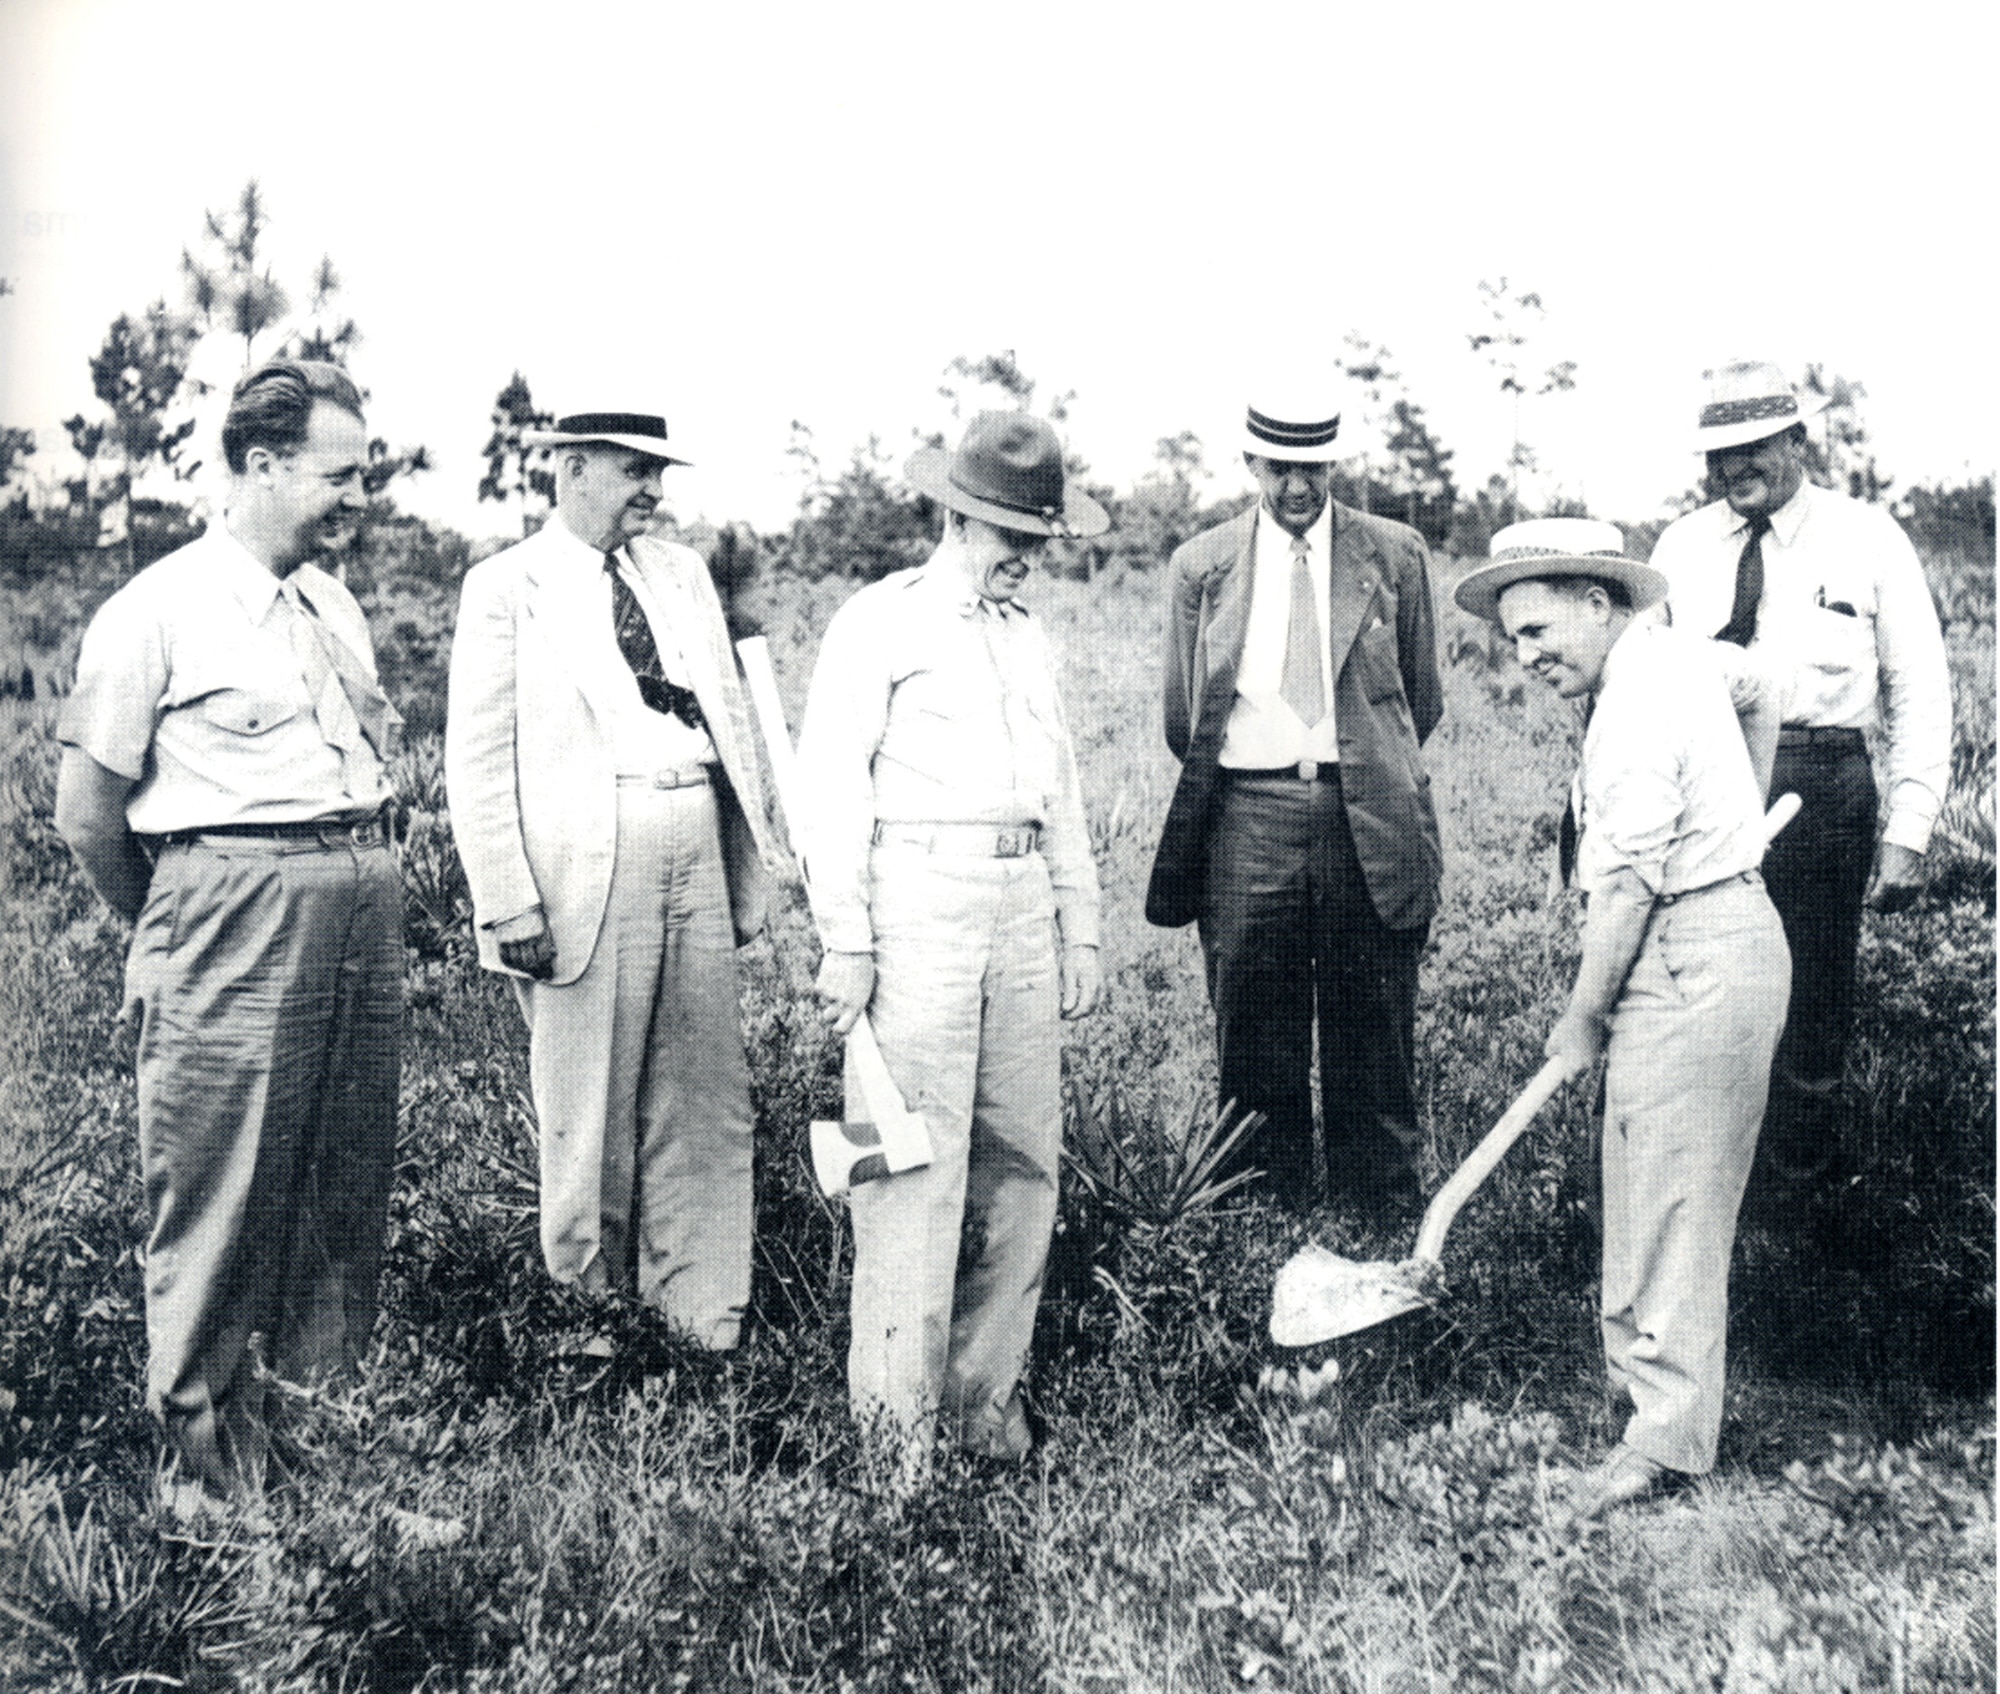 Pictured is the ground breaking ceremony for Tyndall Air Force Base, Florida, circa 1941. (U.S. Air Force courtesy photo)